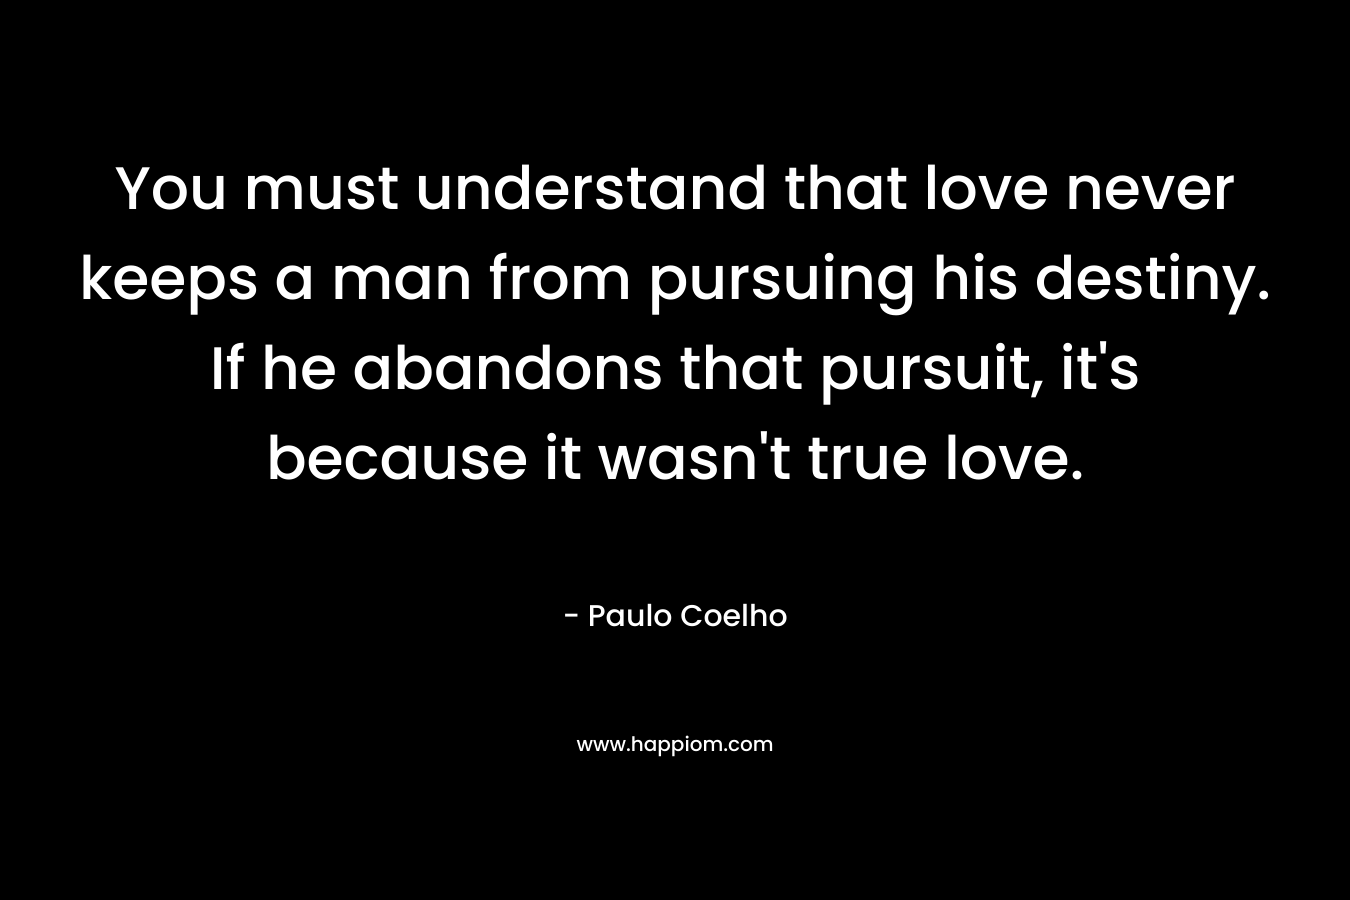 You must understand that love never keeps a man from pursuing his destiny. If he abandons that pursuit, it's because it wasn't true love.